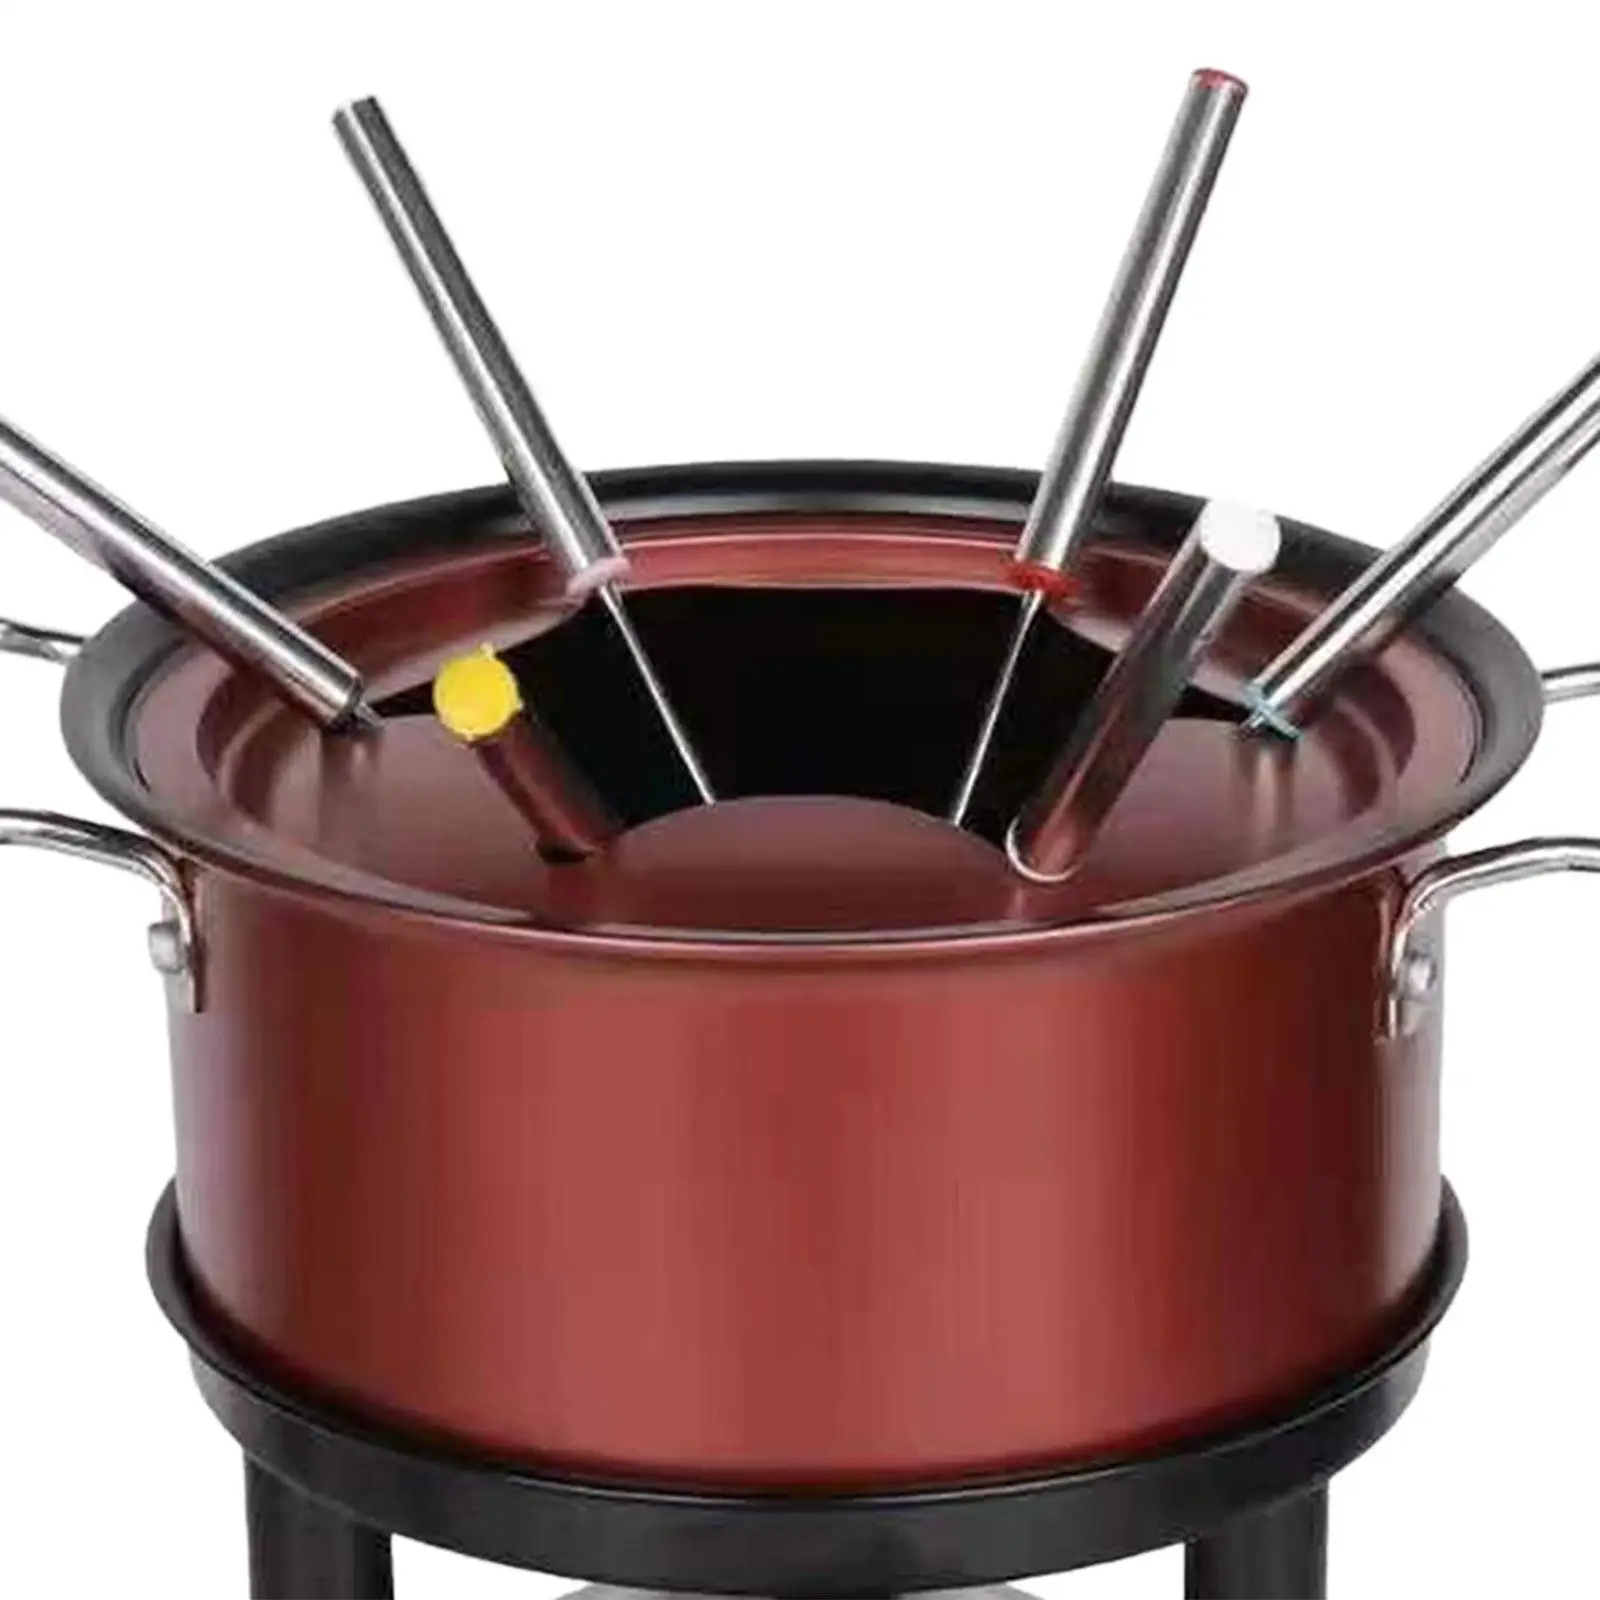 Fondue Pot Set Sturdy Temperature Control Lightweight Cheese Fondue Pot for Chocolate Outdoor Camping Household Birthday Party